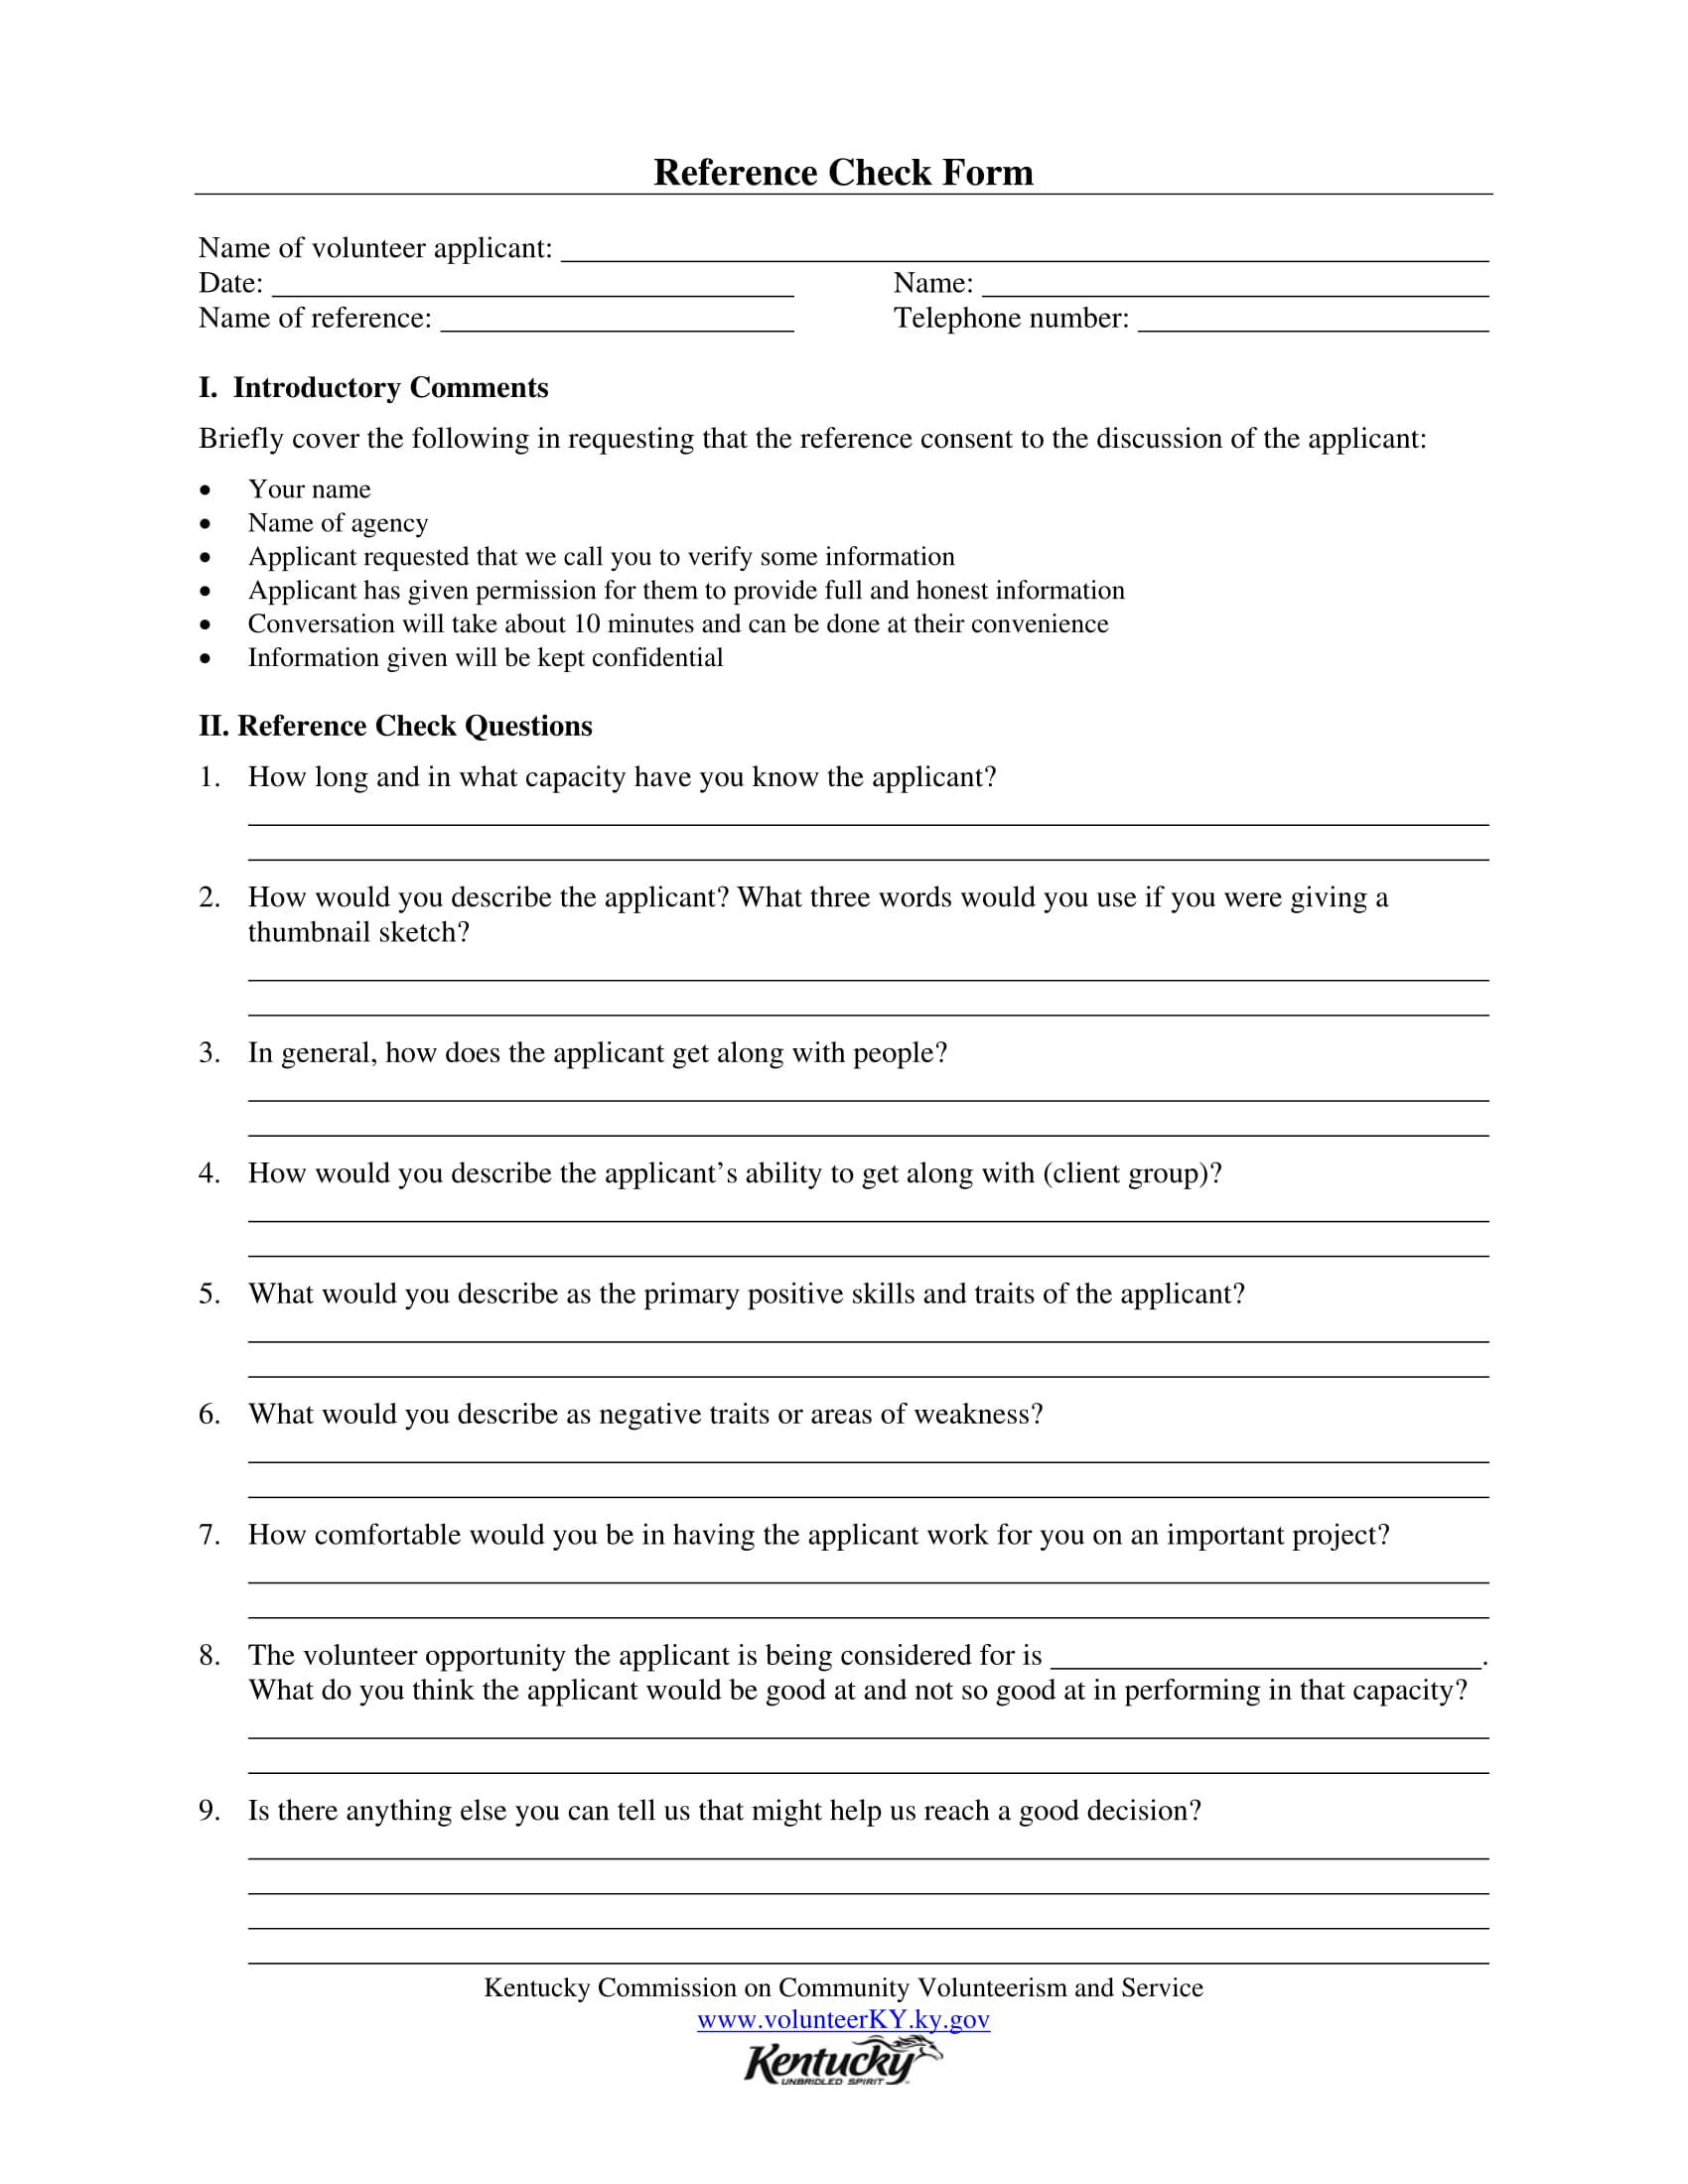 volunteer applicant reference check form 1